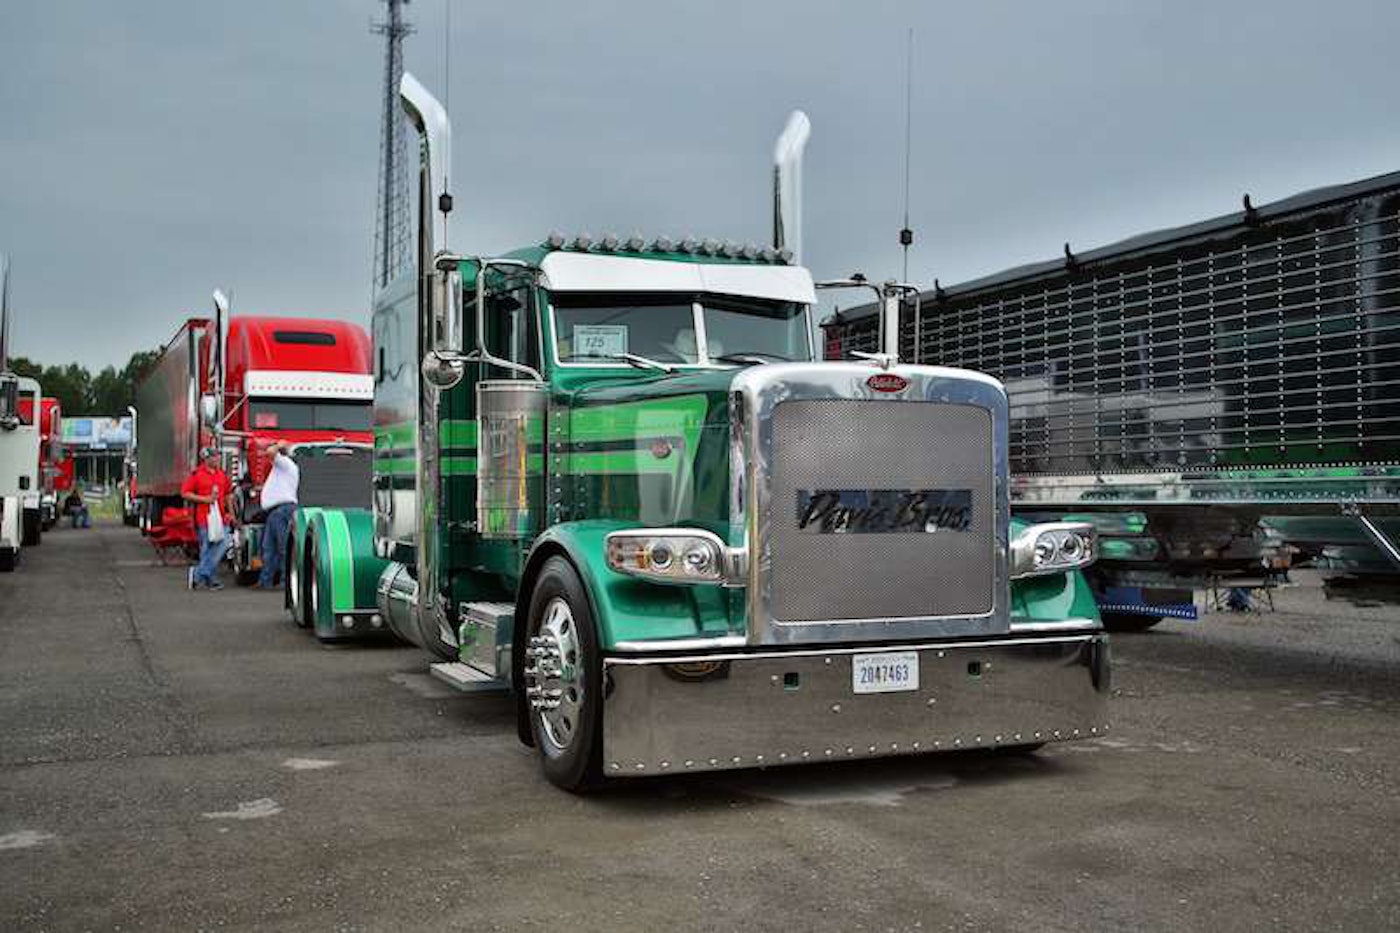 Pride & Polish rewind Video from the Fitzgerald Truck Show Overdrive